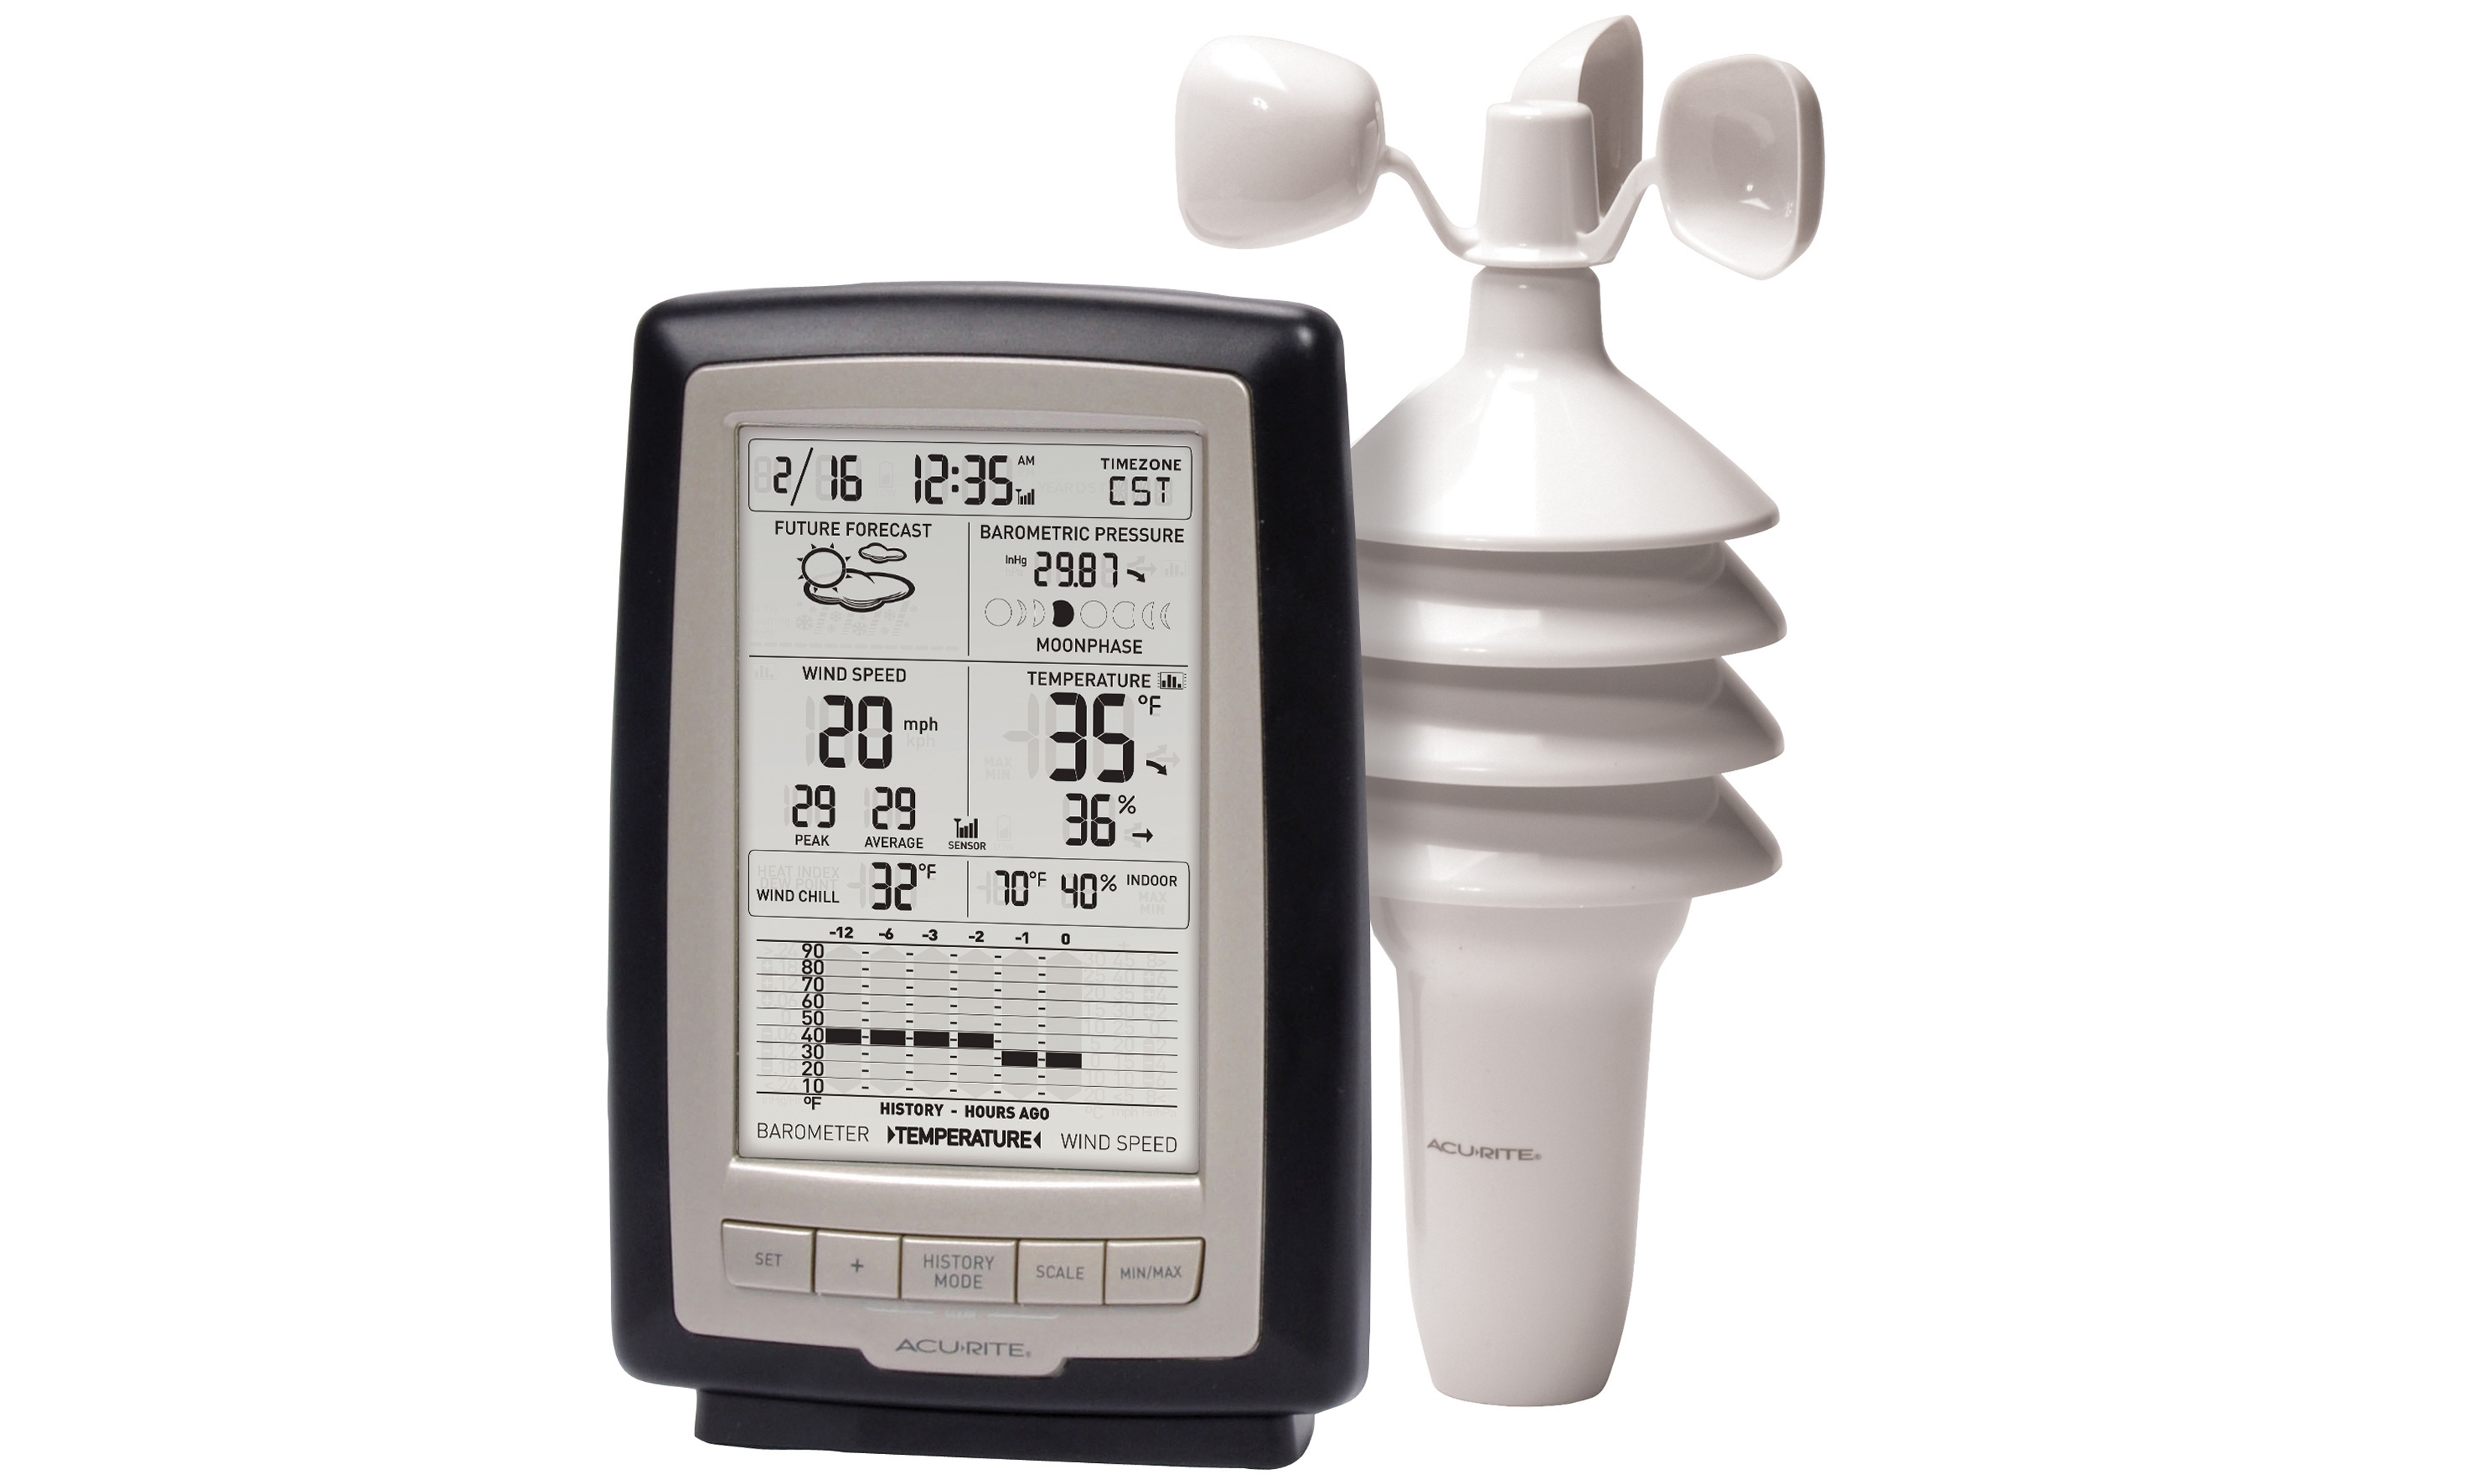 Home Weather Station with Wind Speed